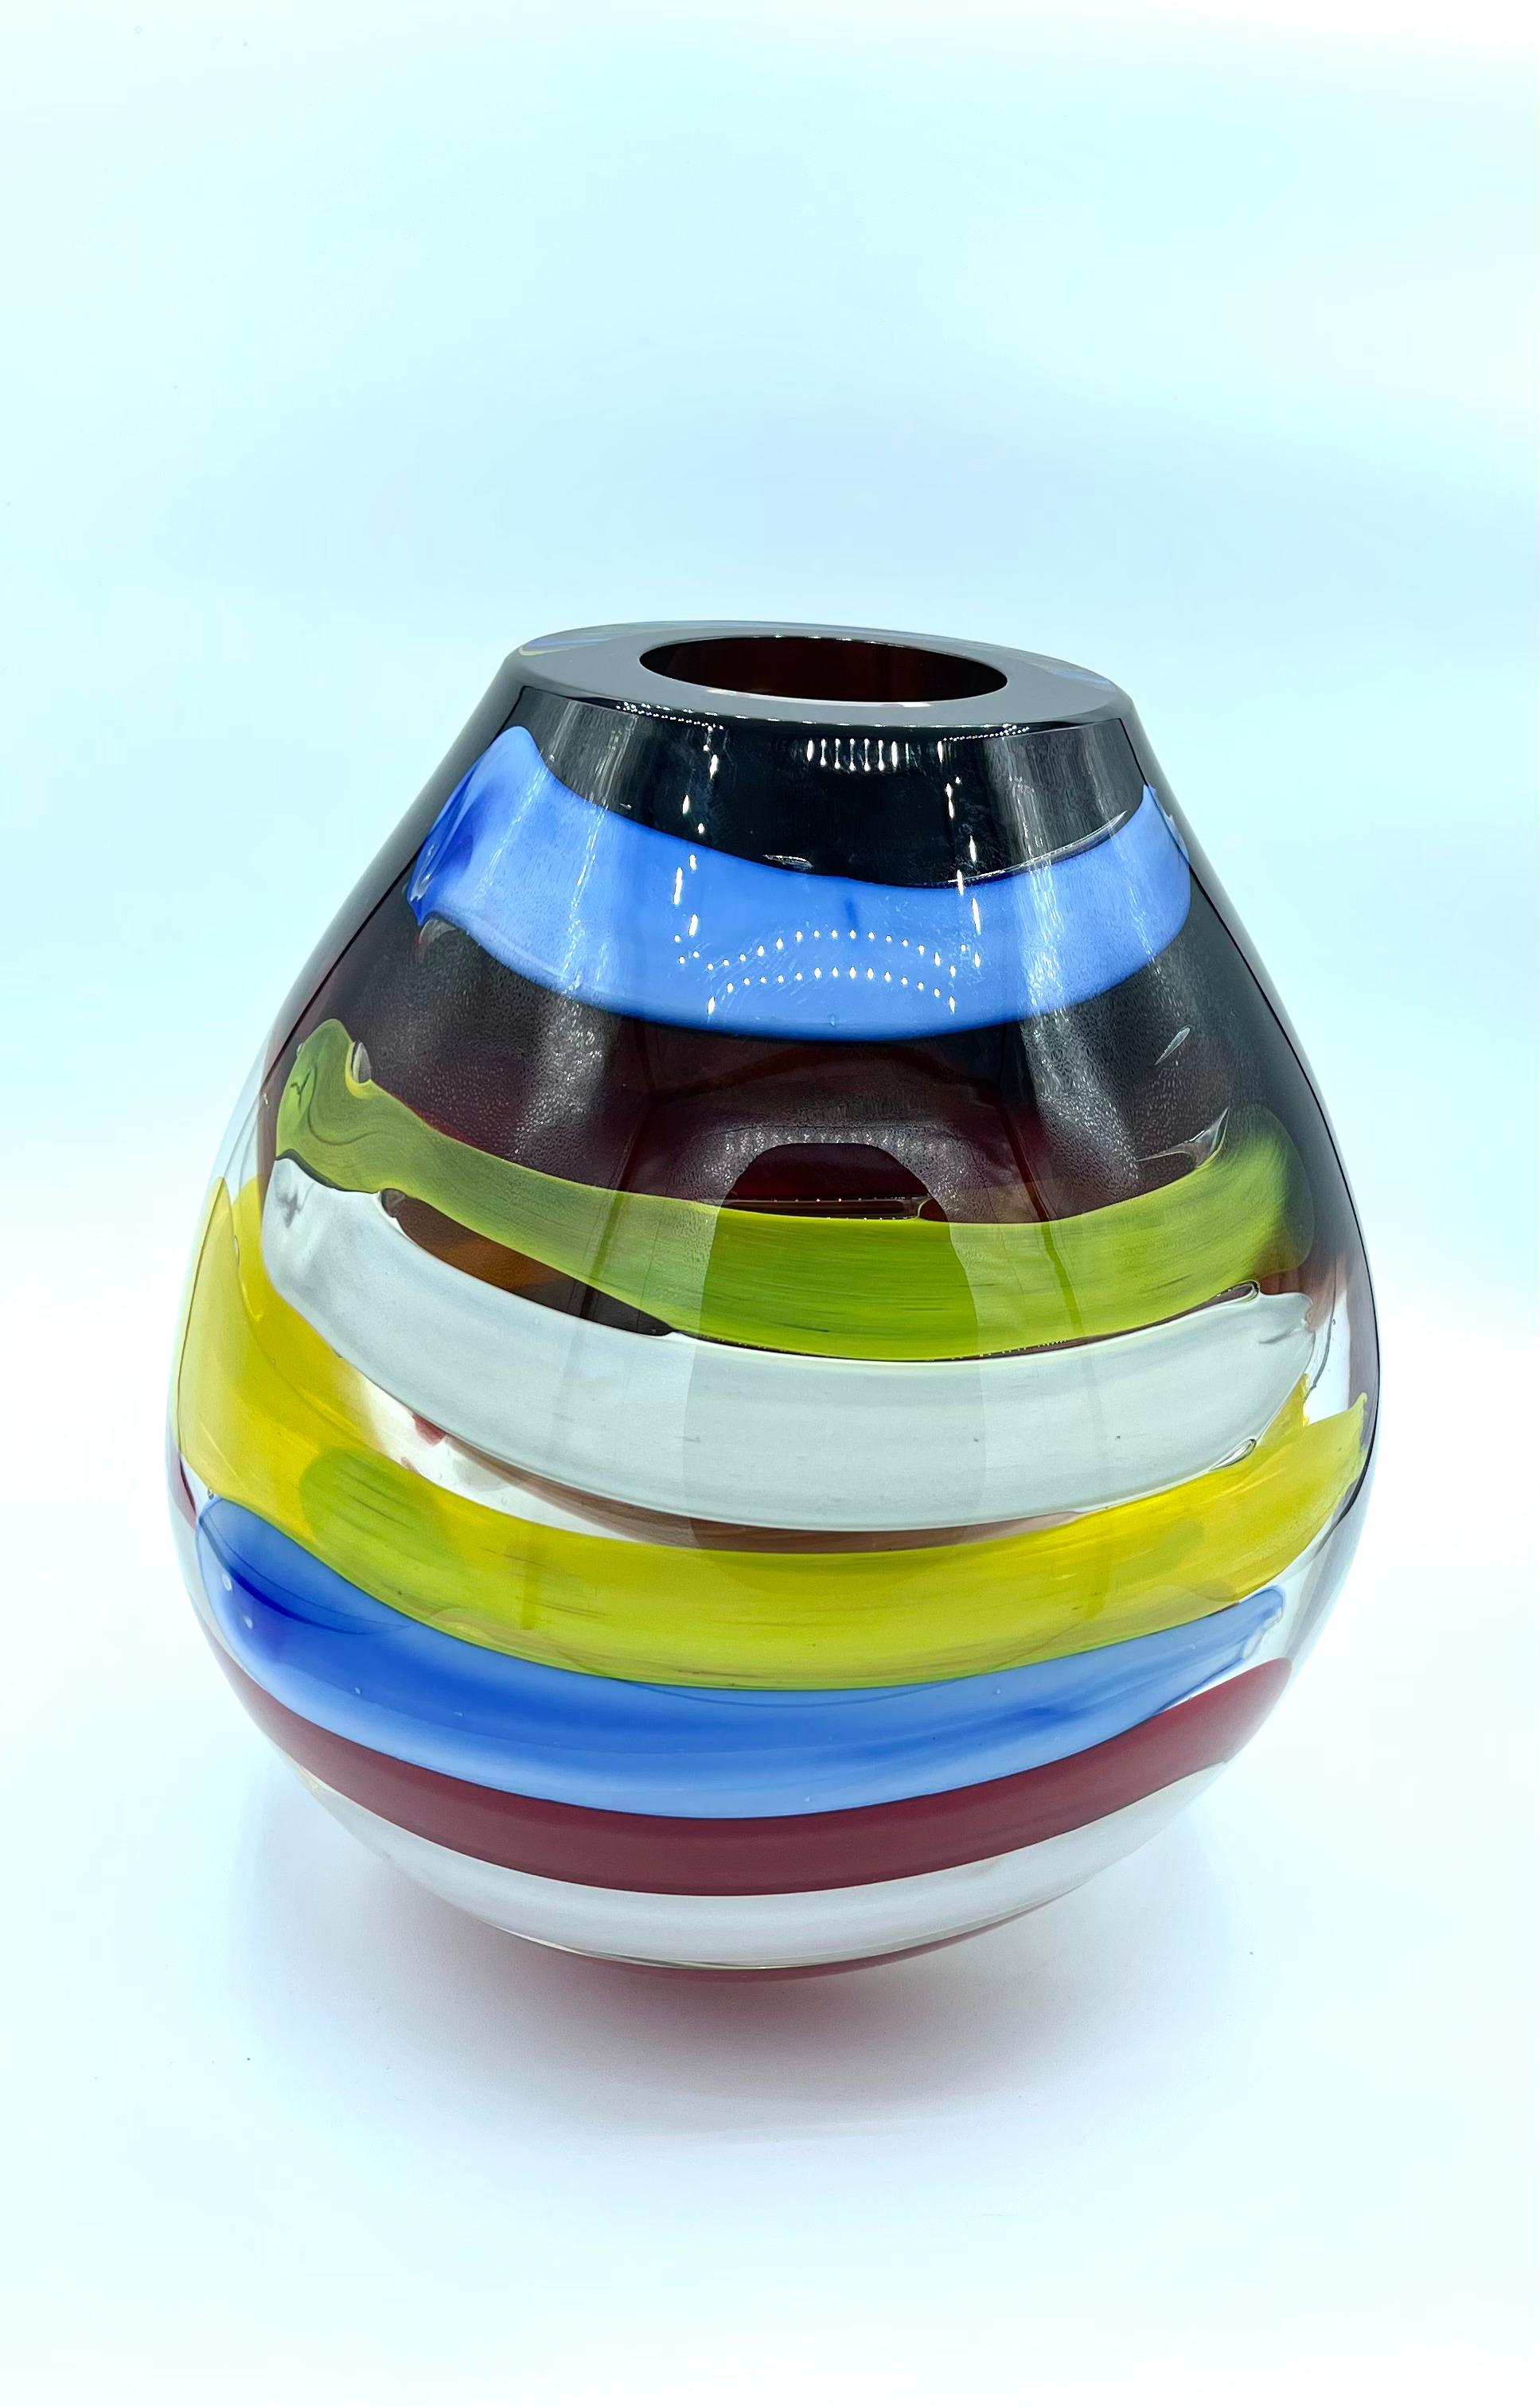 This colorful vase is a unique piece in both its form and colors. To create it, various layers of Murano glass must be overlaid using the incalmo technique, which is a glassworking method that allows the crafting of objects consisting of distinct